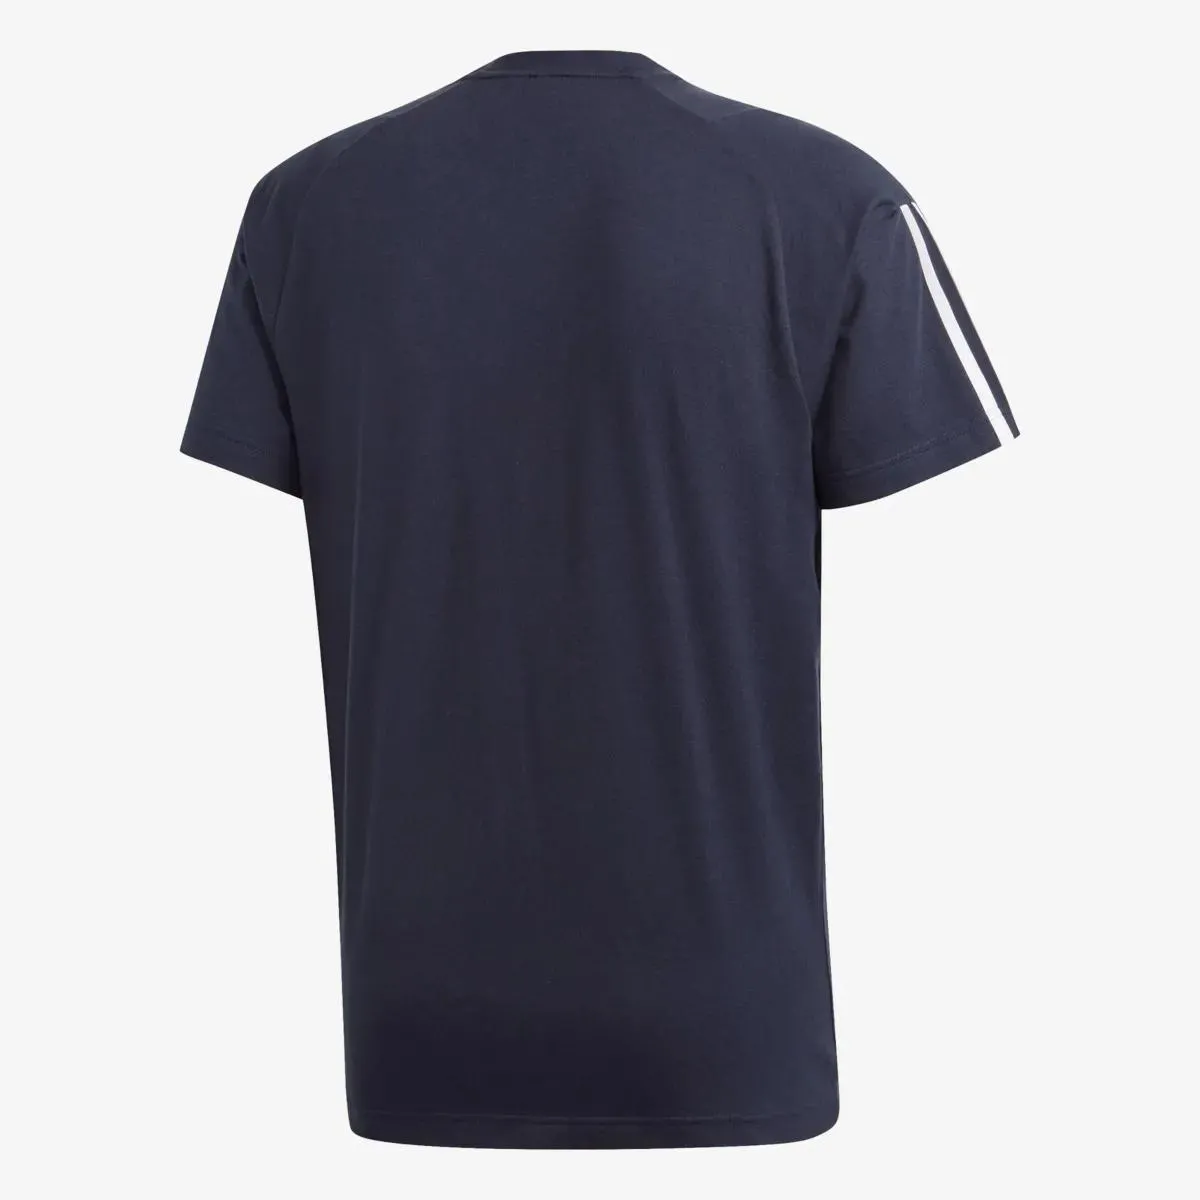 adidas T-shirt MUST HAVES 3 STRIPES 